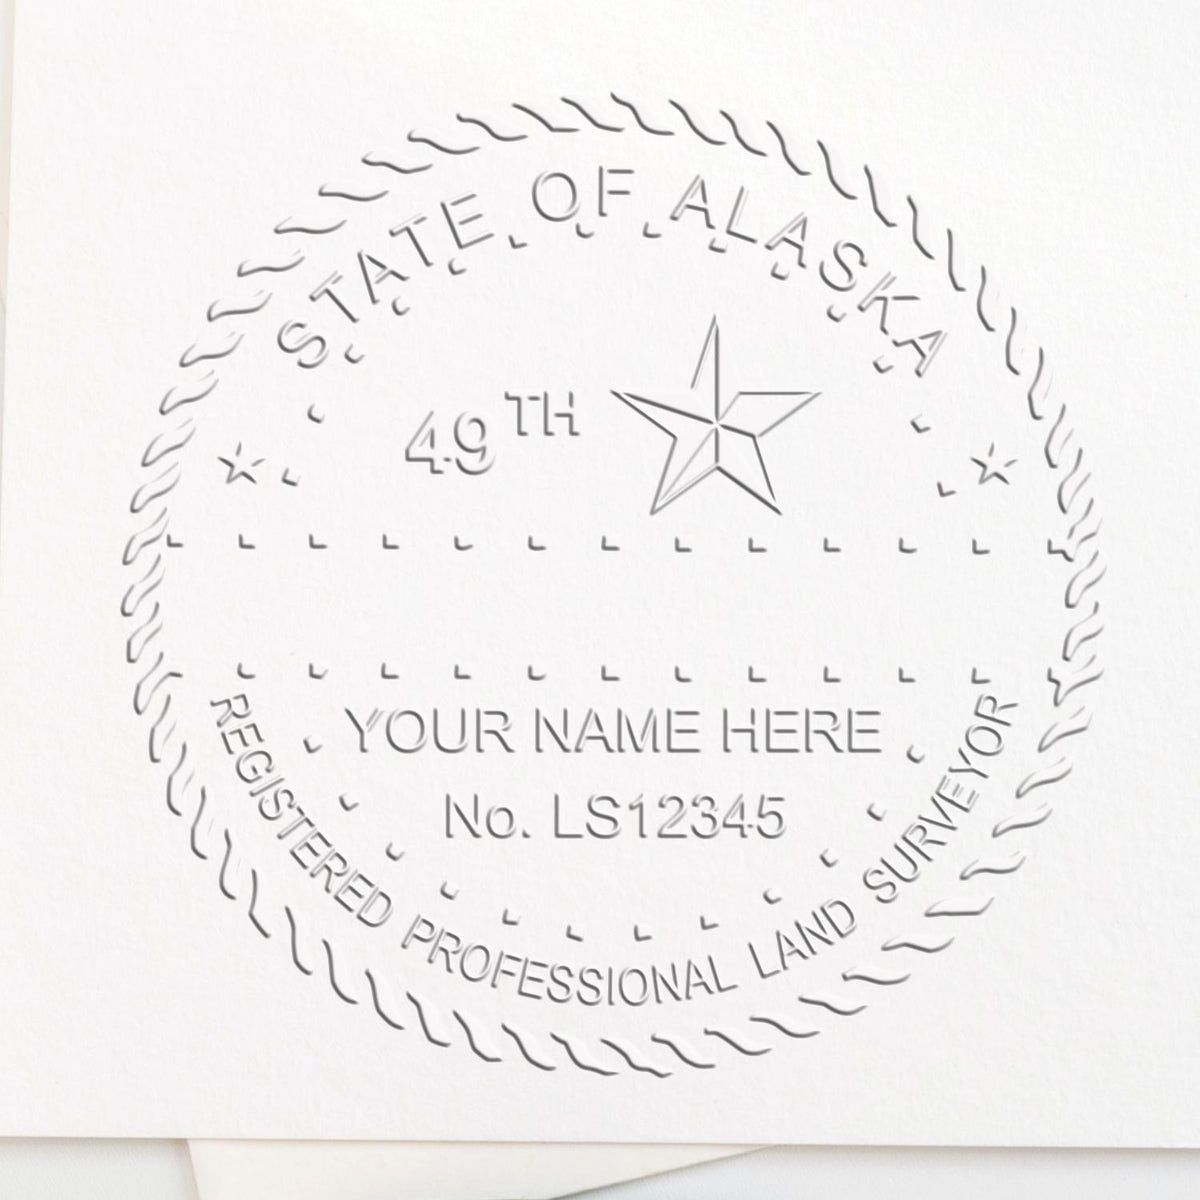 A photograph of the Hybrid Alaska Land Surveyor Seal stamp impression reveals a vivid, professional image of the on paper.